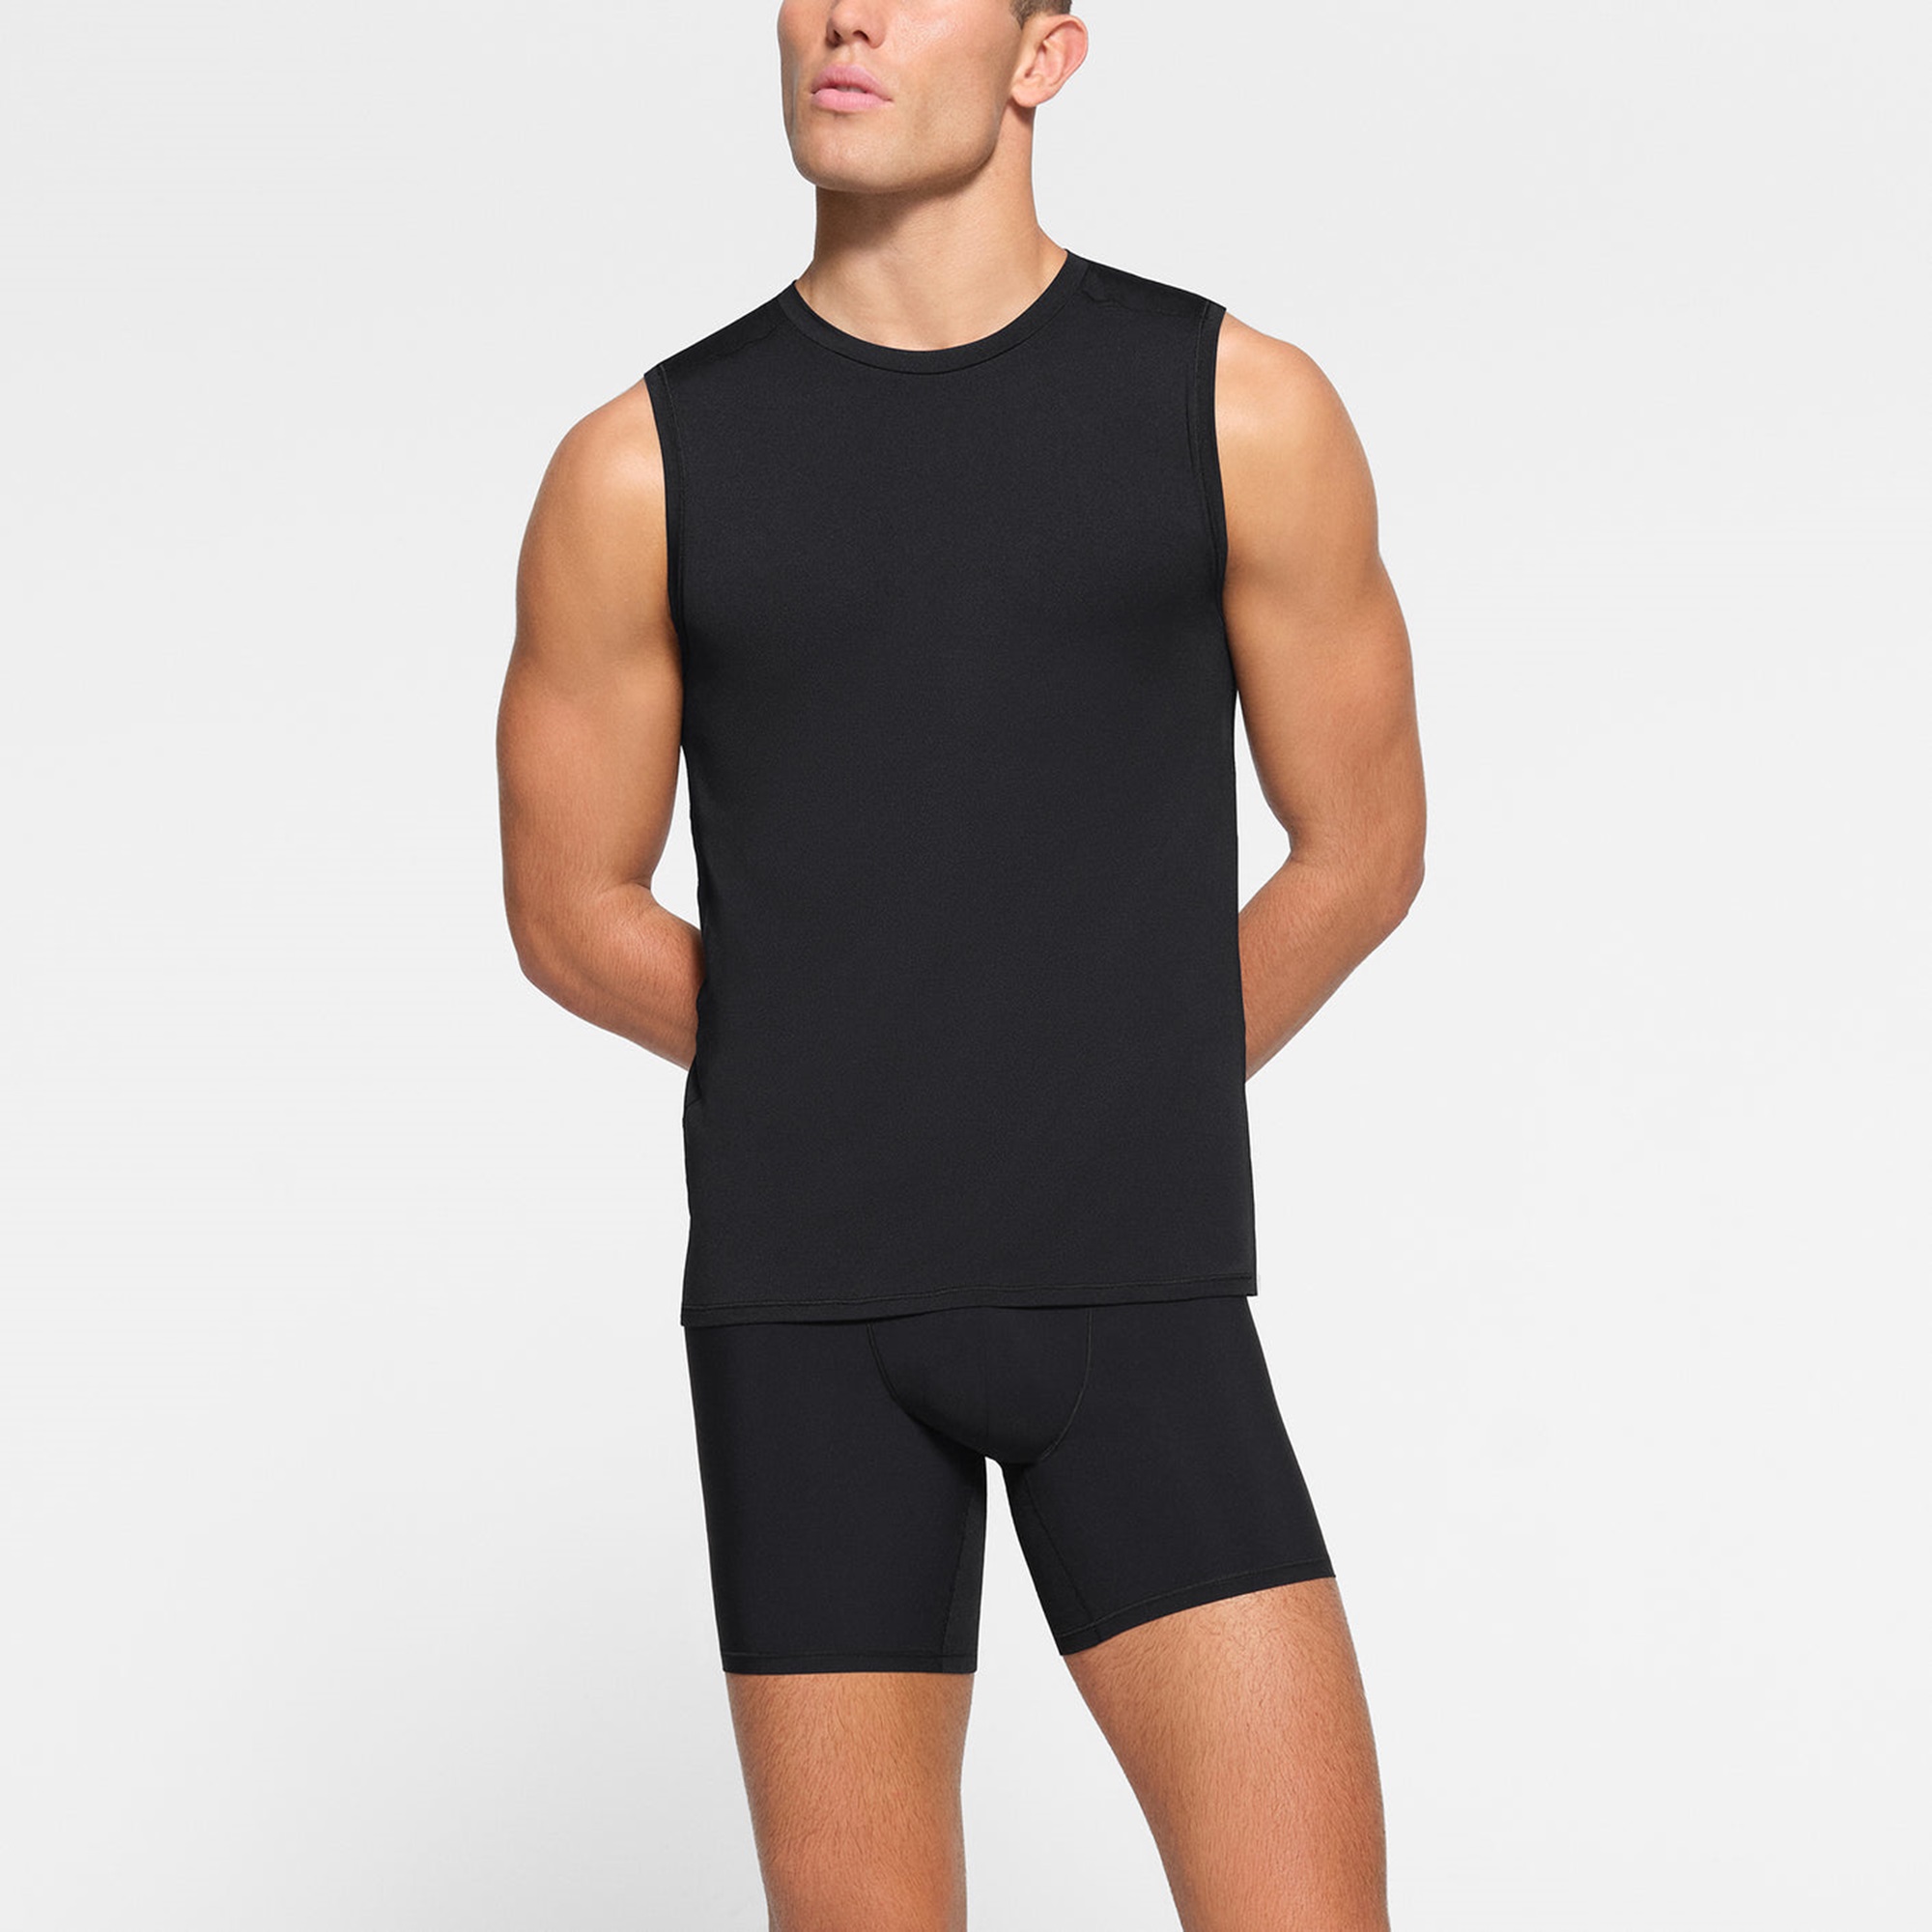 Comfort and compression: Skims brings innovation to men's apparel